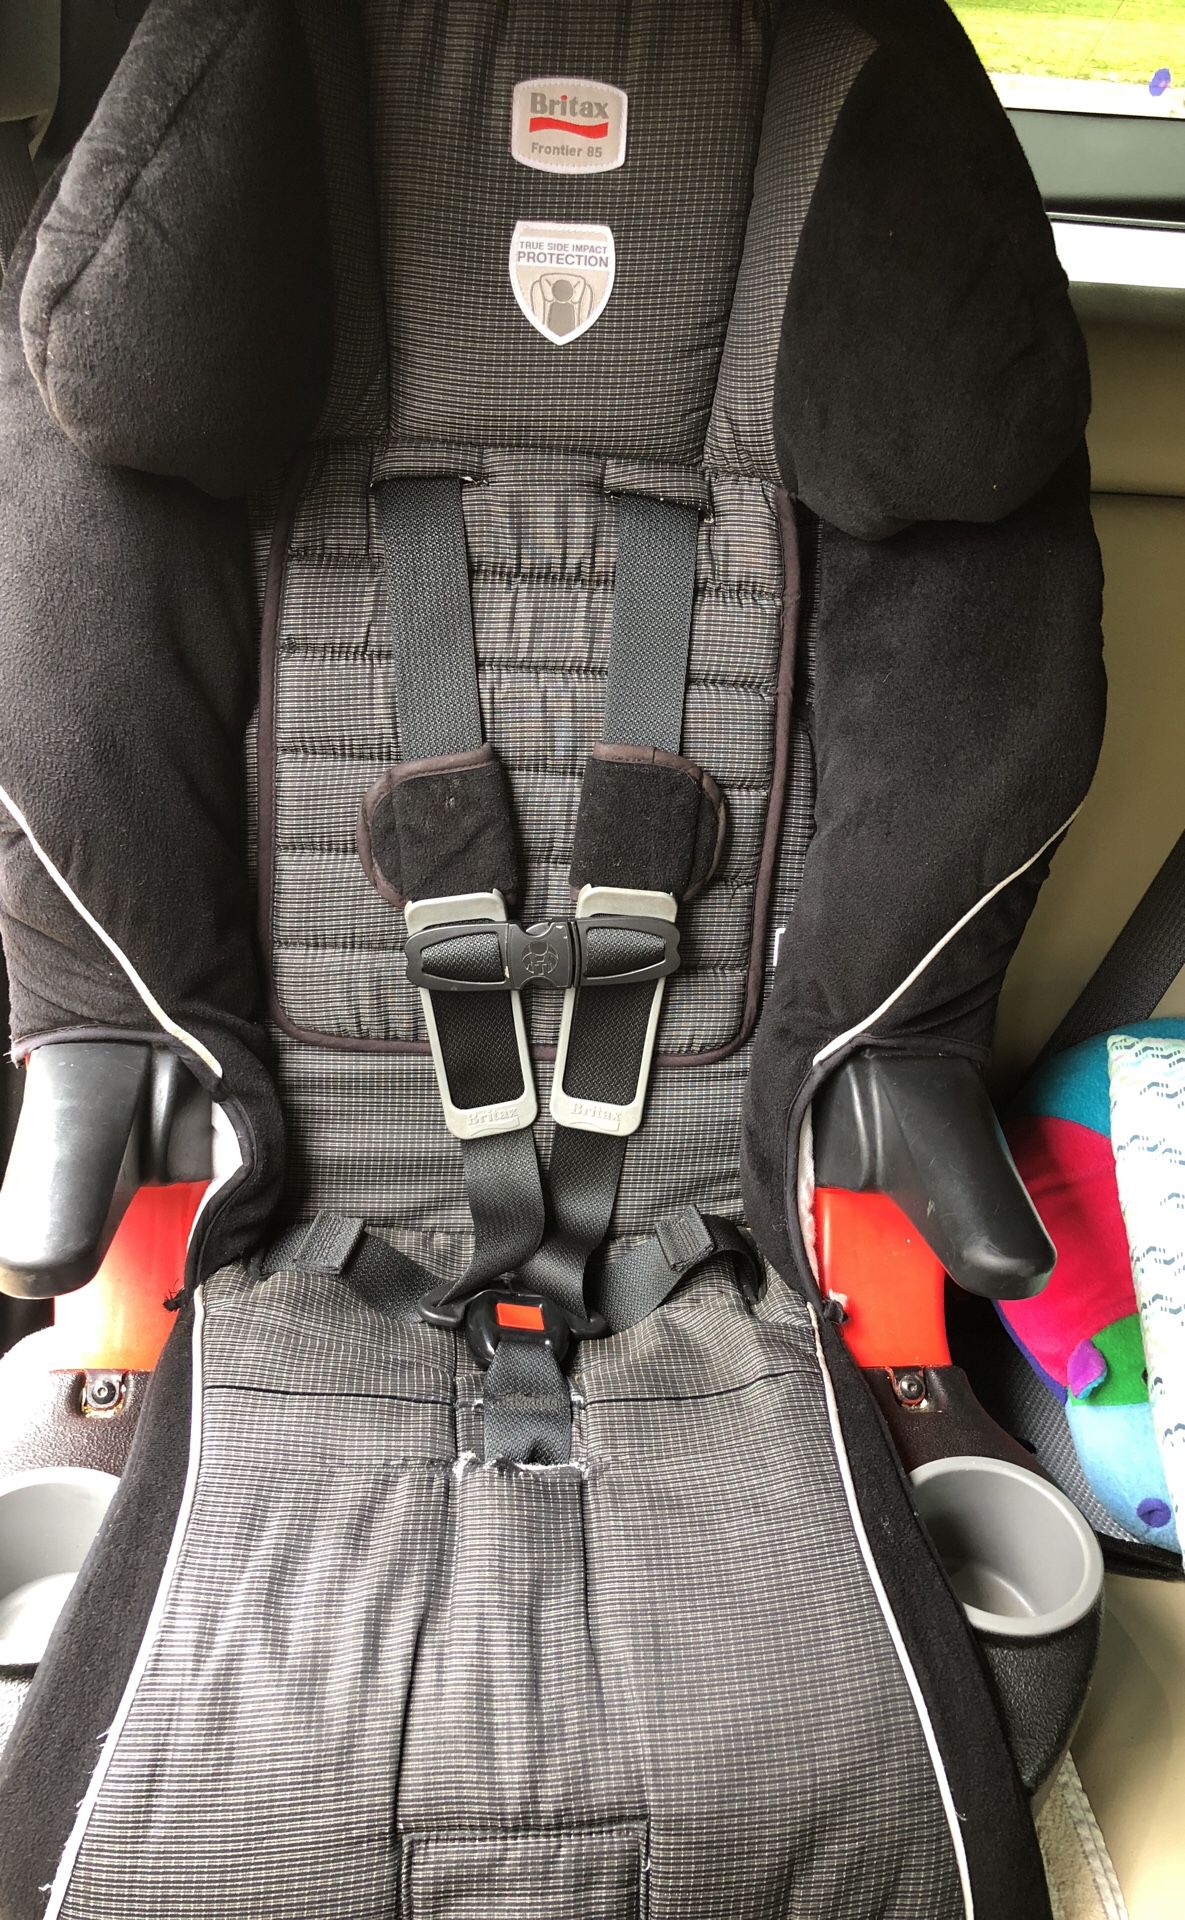 Britax child booster seat for sale.